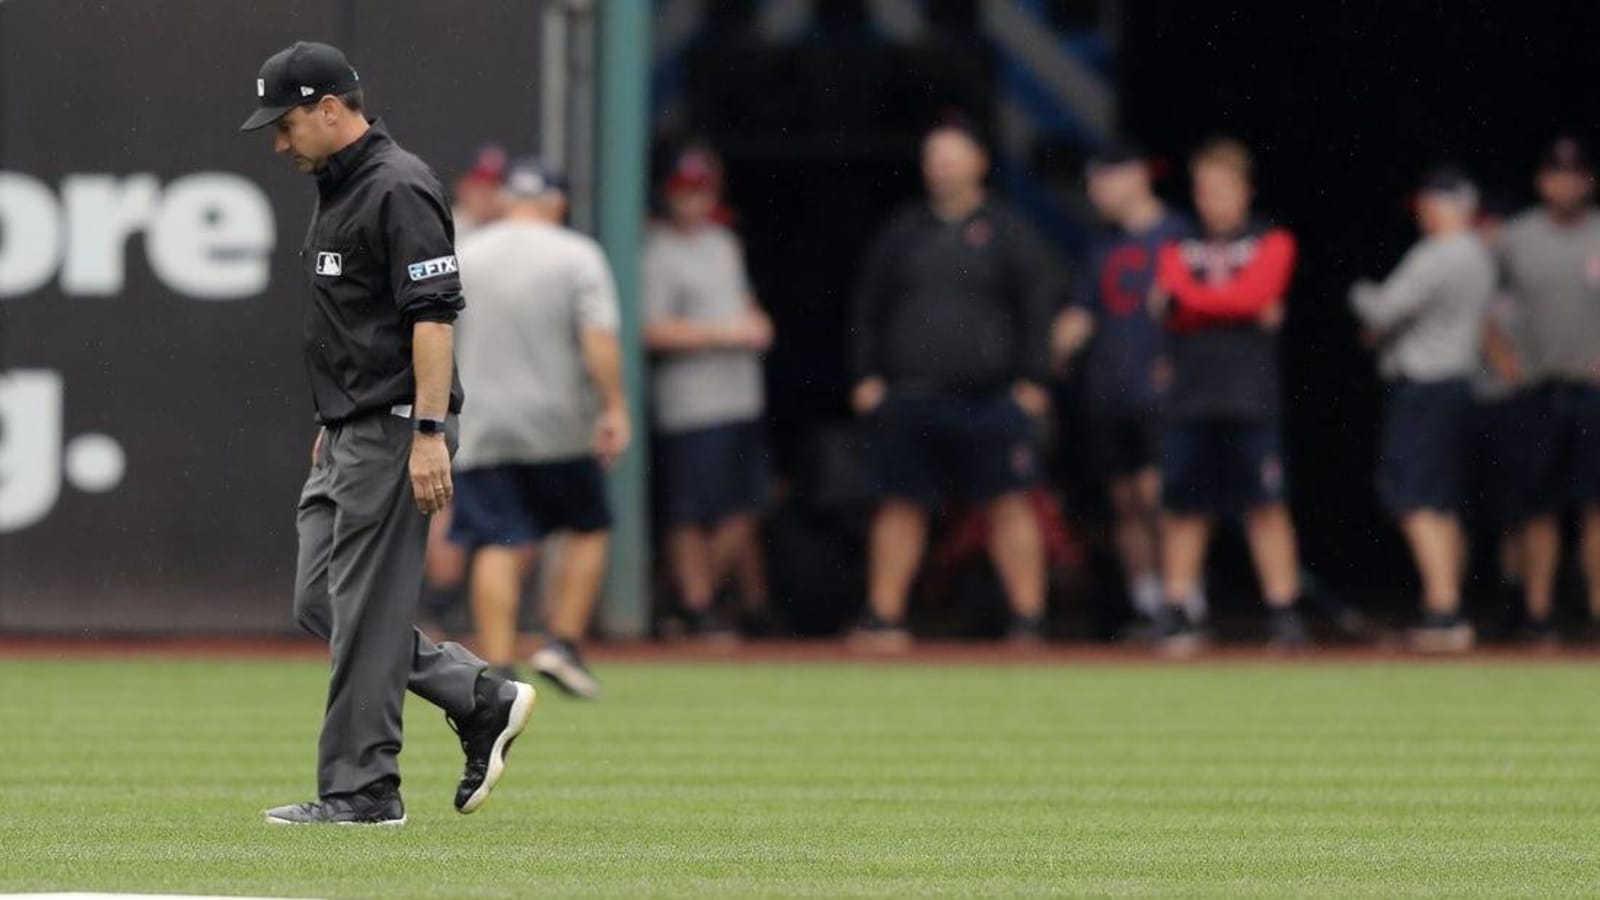 White Sox-Guardians postponed due to field conditions